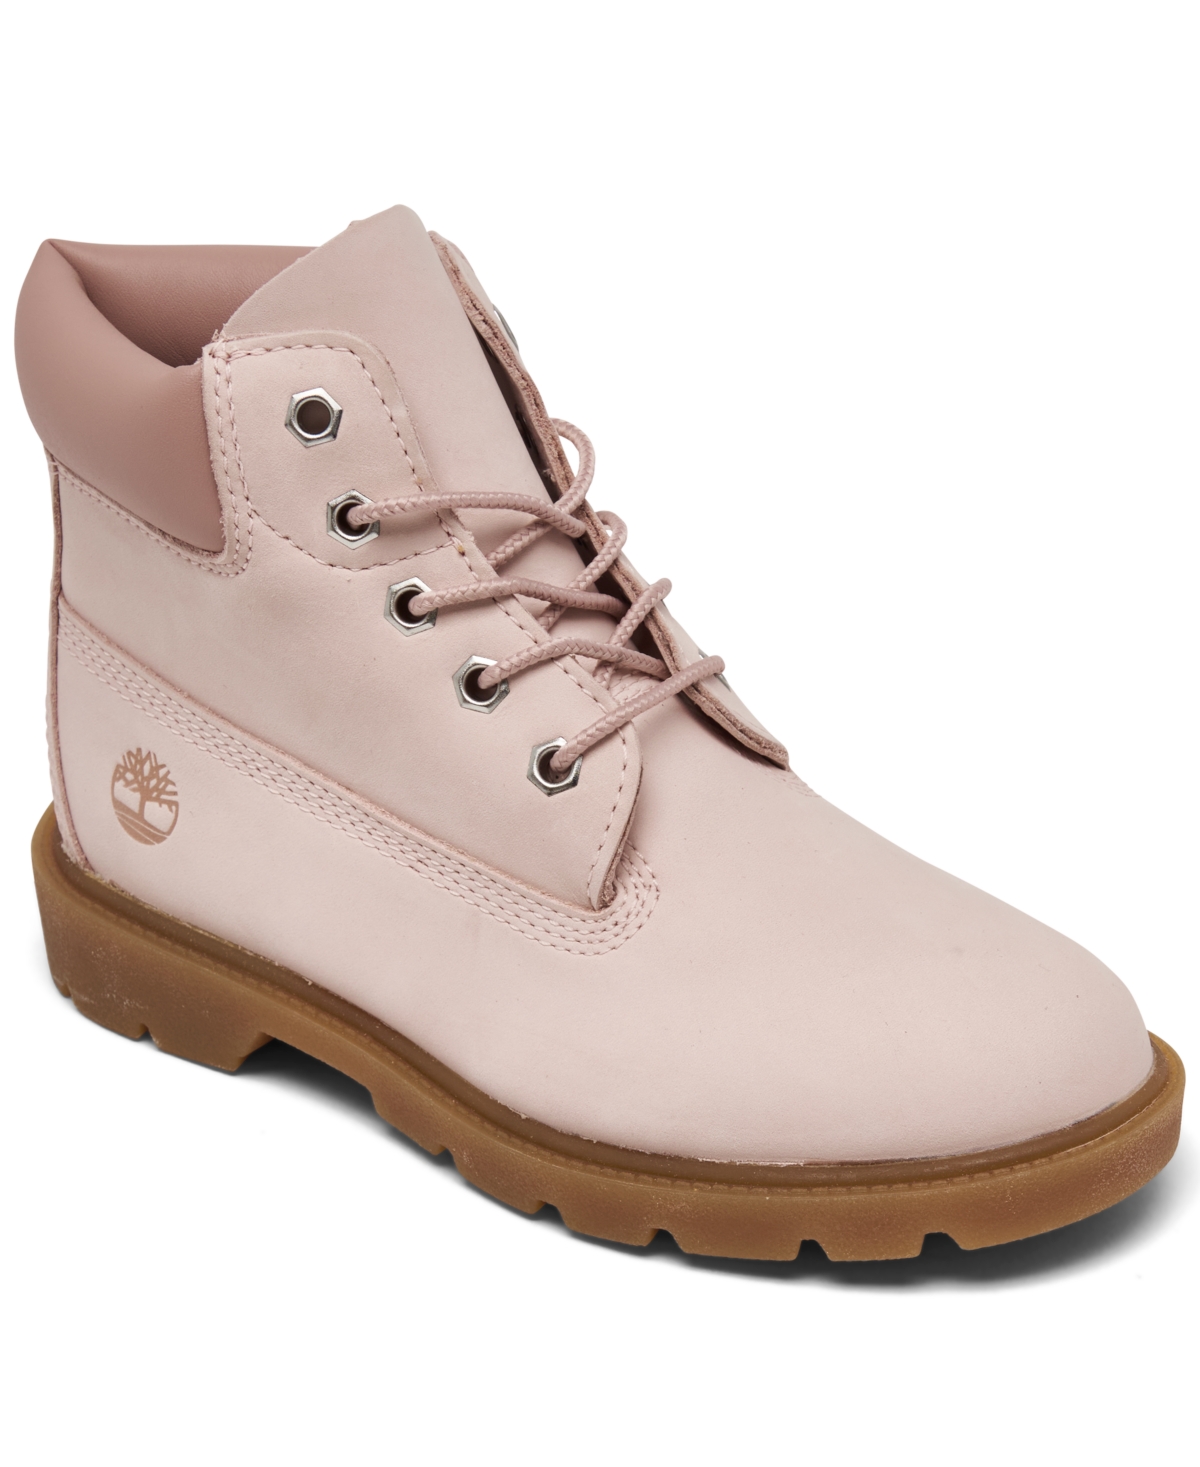 Timberland Kids' Little Girls 6" Classic Water-resistant Boots From Finish Line In White